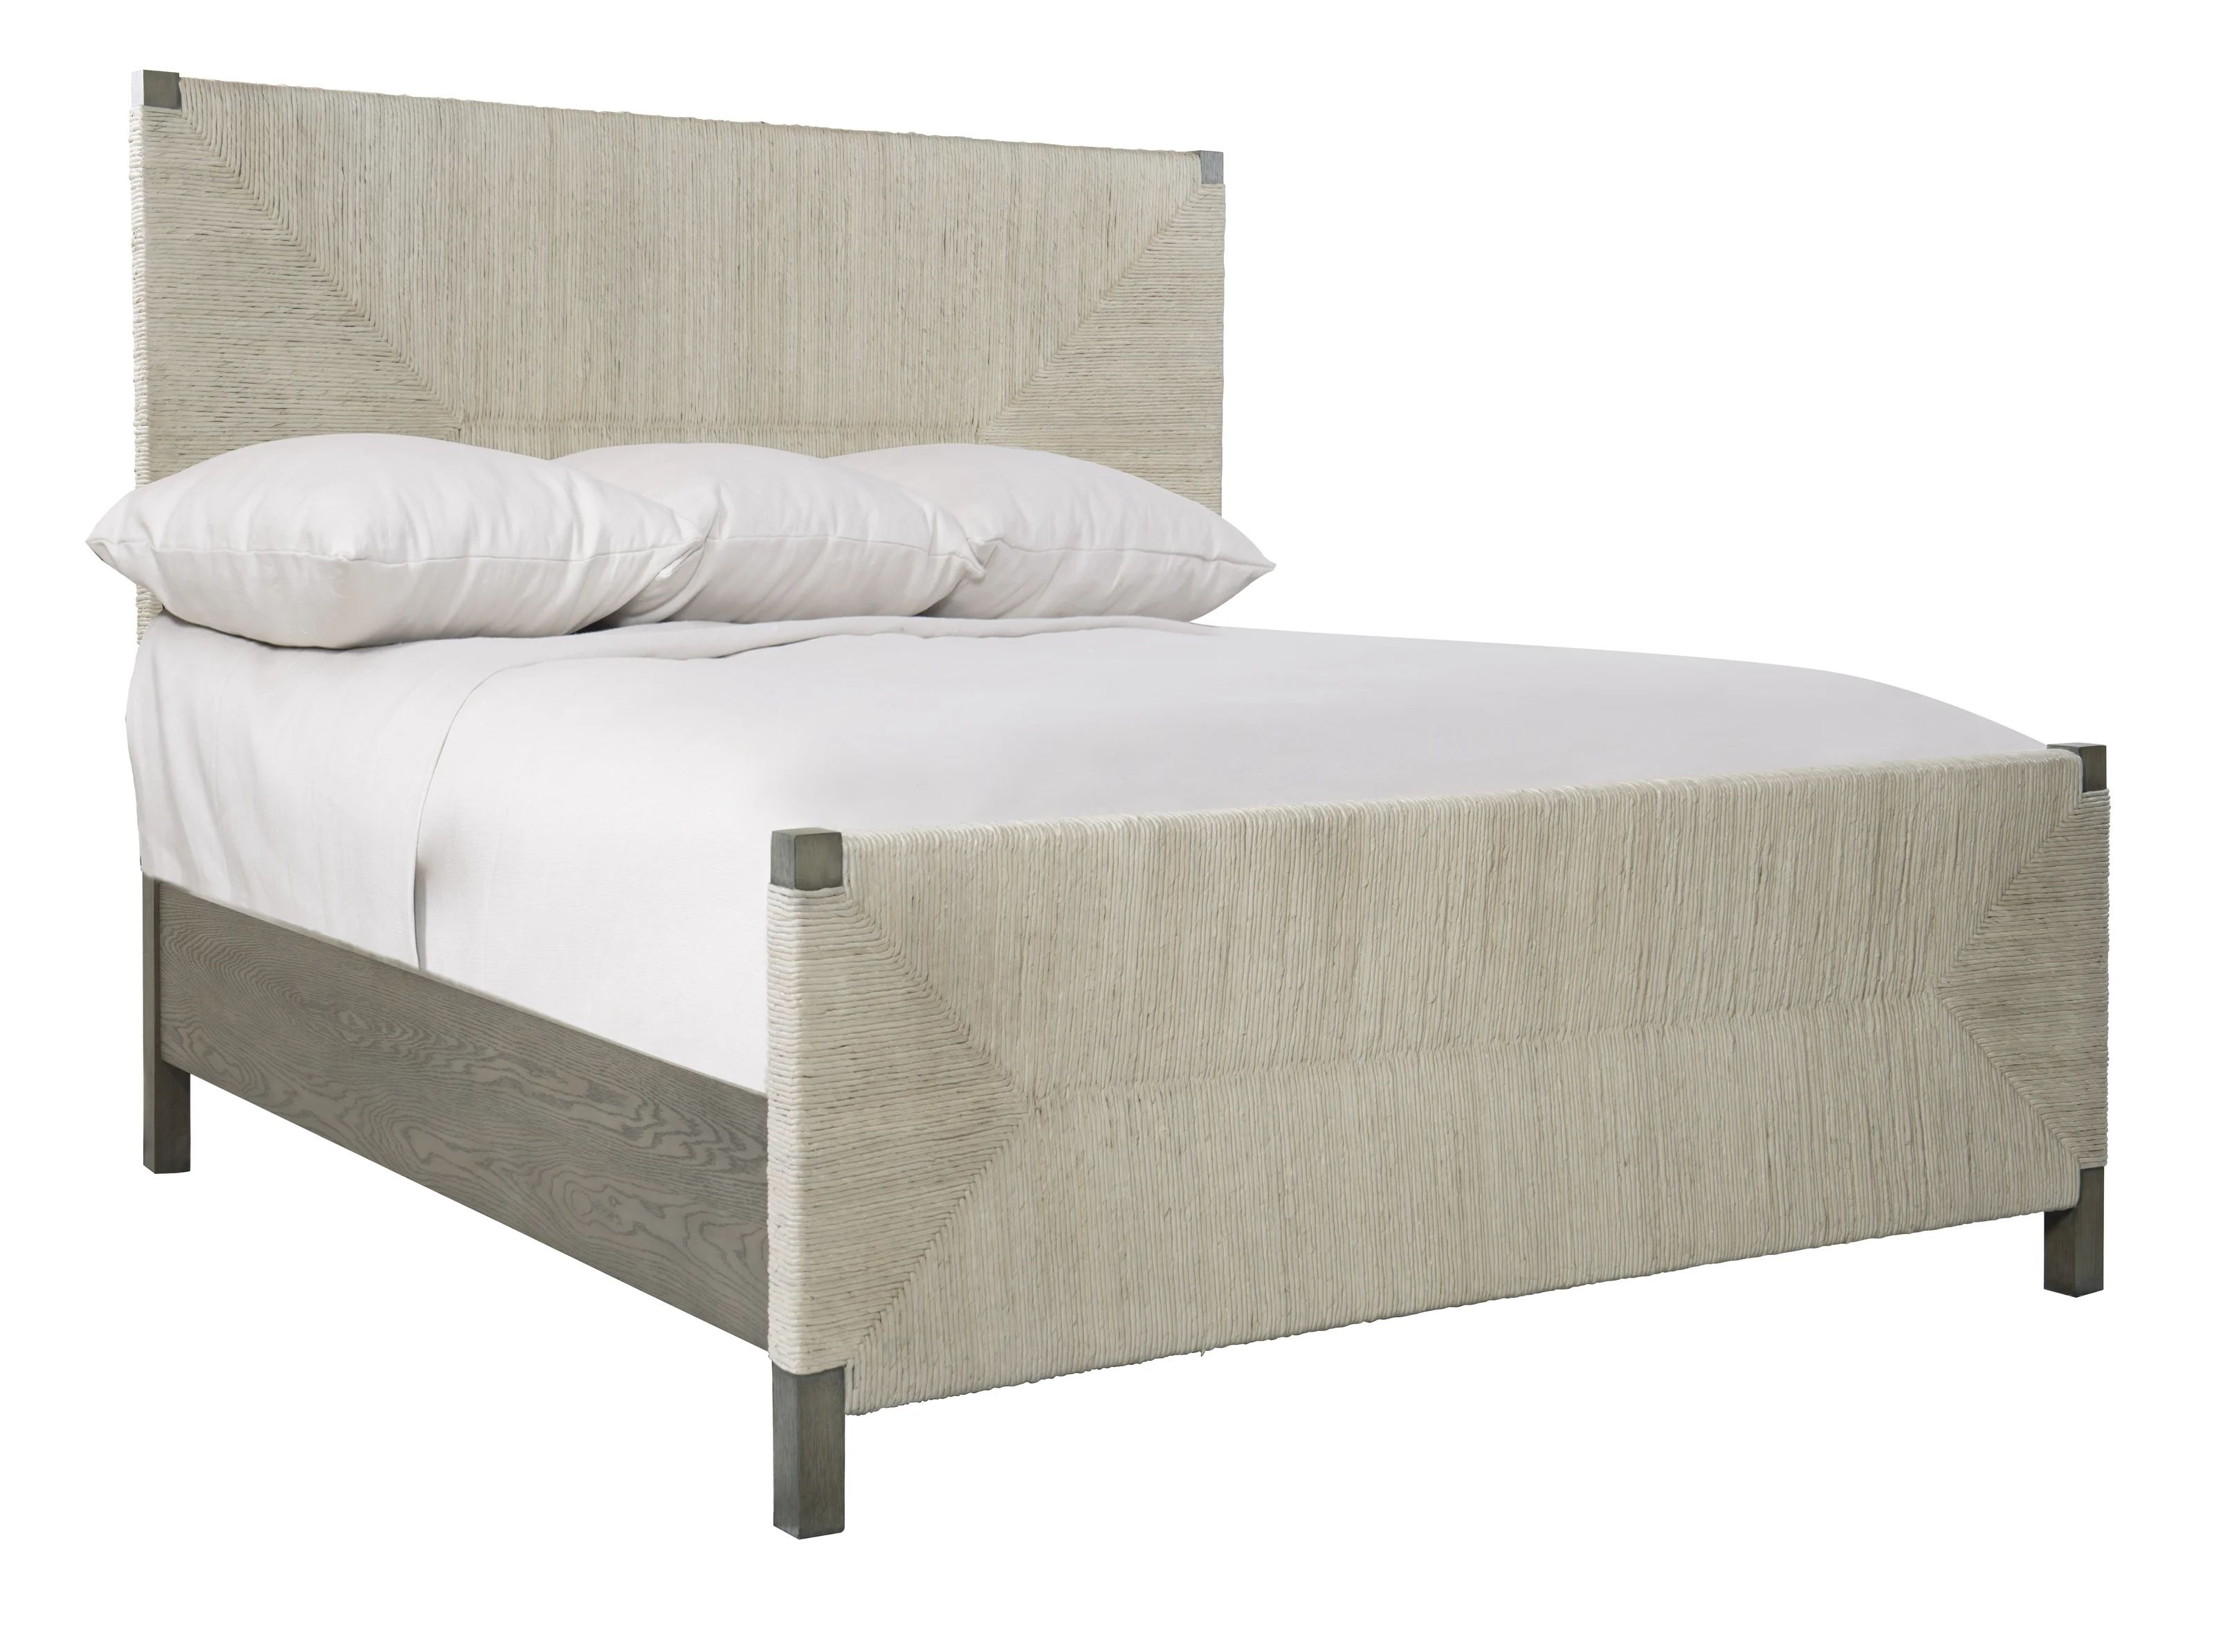 Alannis Solid Wood and Upholstered Low Profile Standard Bed | Wayfair North America